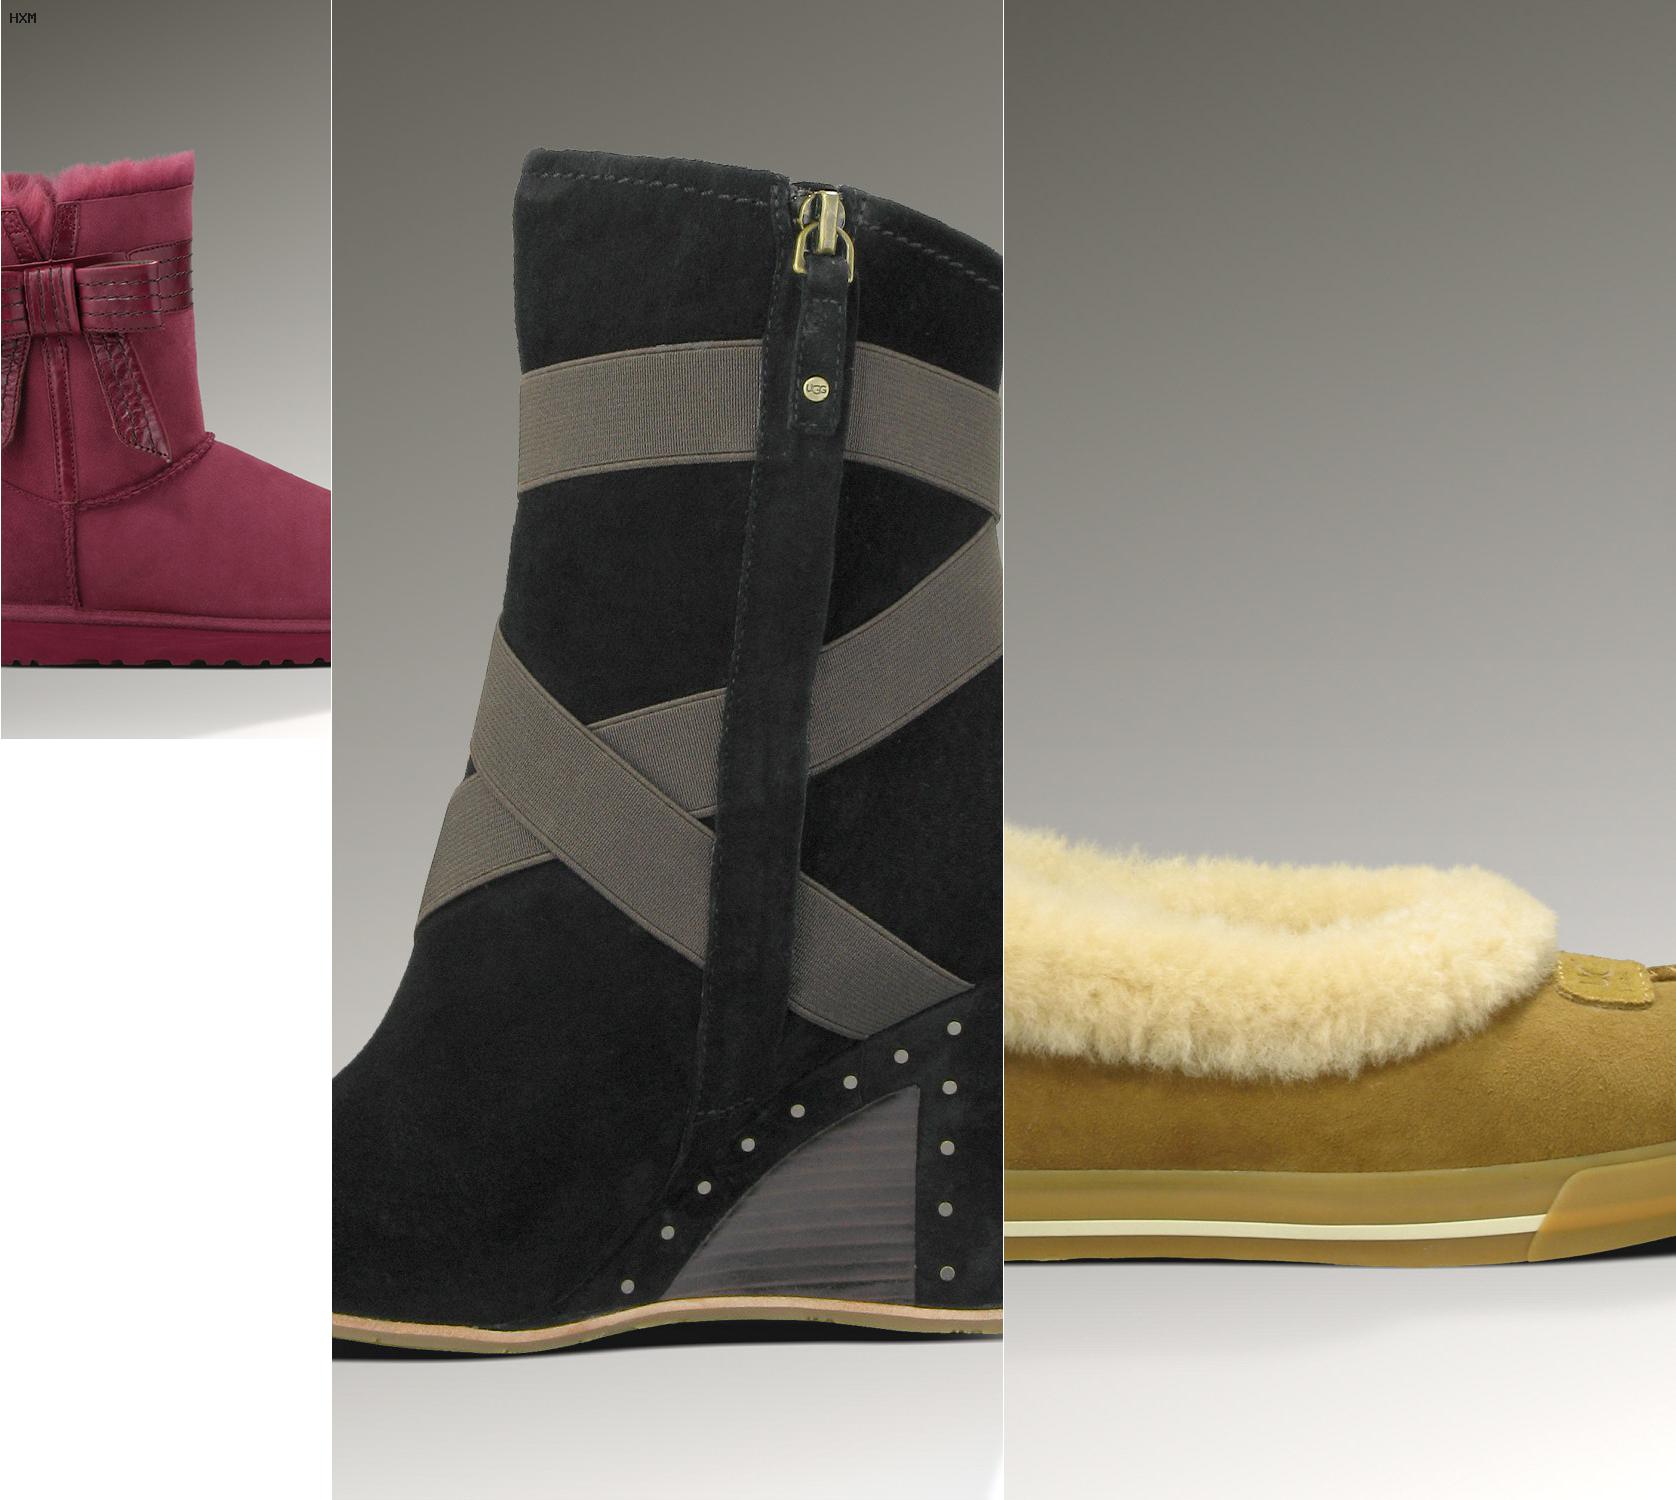 imitation ugg boots suppliers